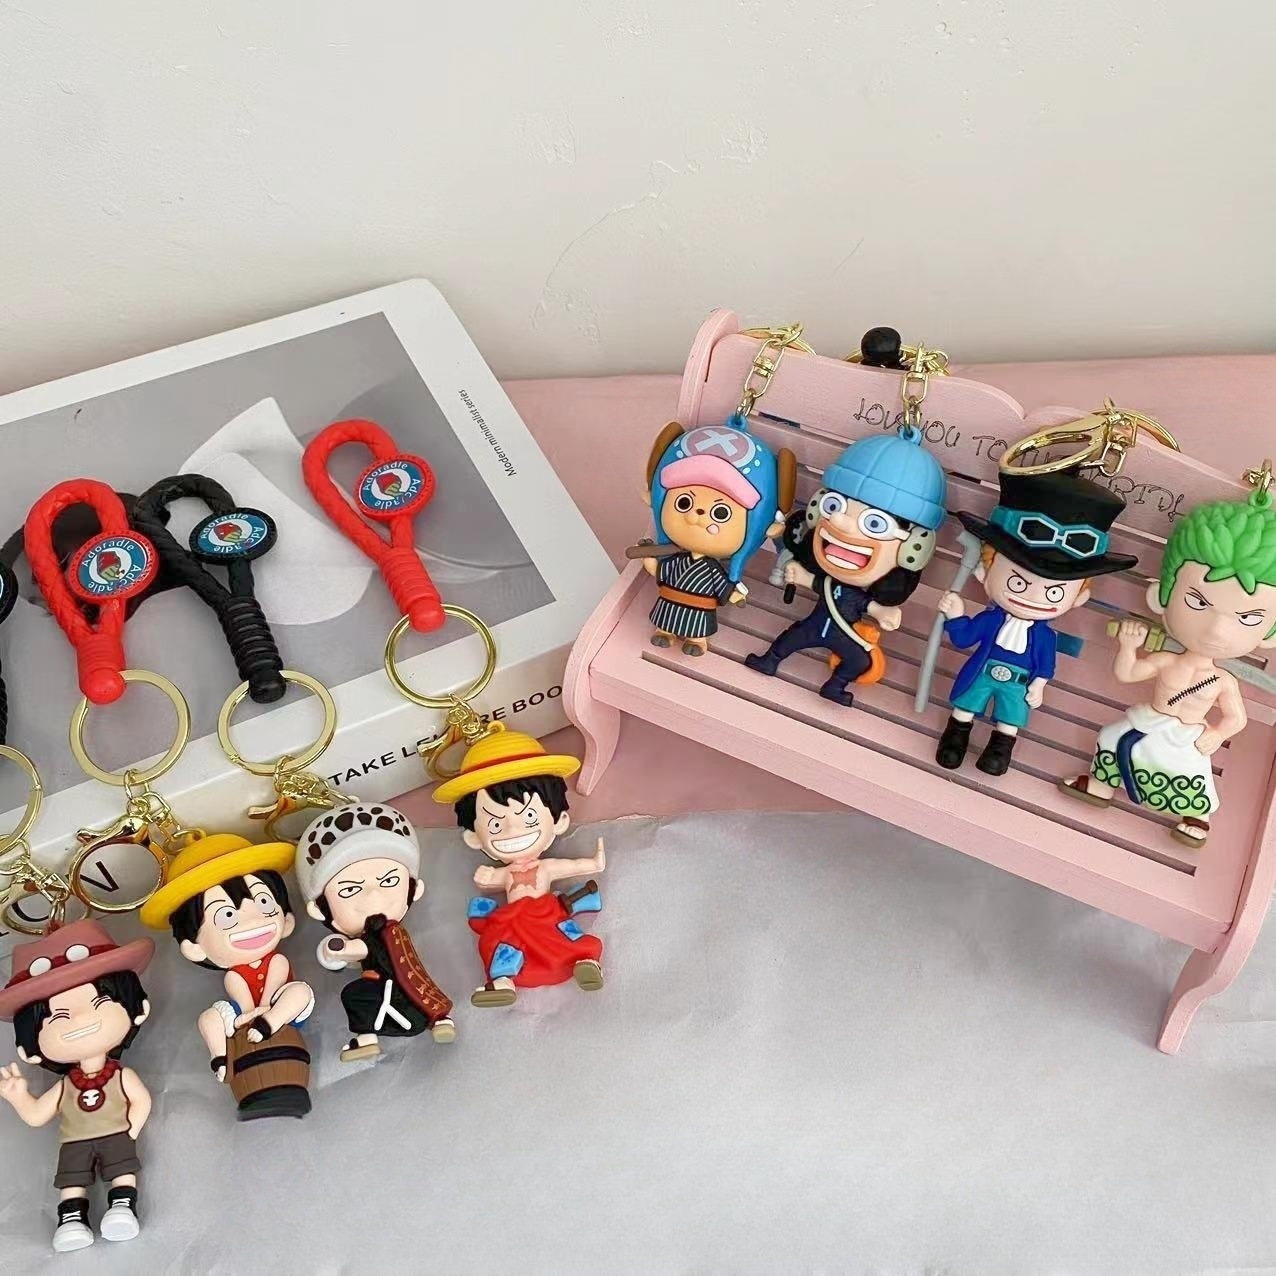 New One Piece Anime Keychain Cartoon Luffy Zoro Toy Bag Package Pendant Car Key Chain Small Gift